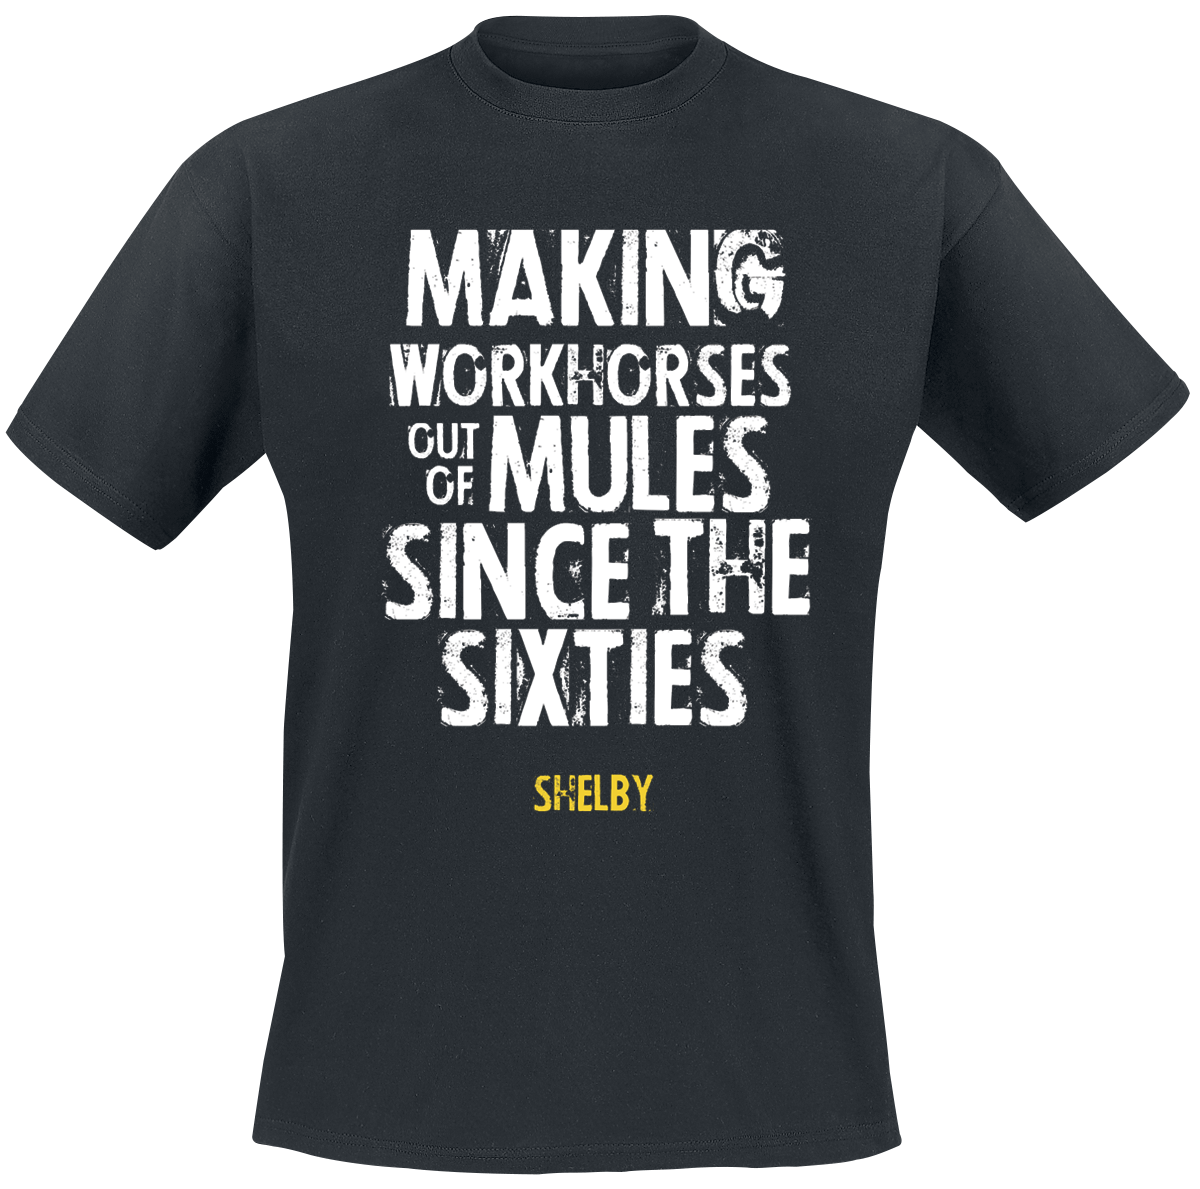 Shelby - Since The Sixties - T-Shirt - black image